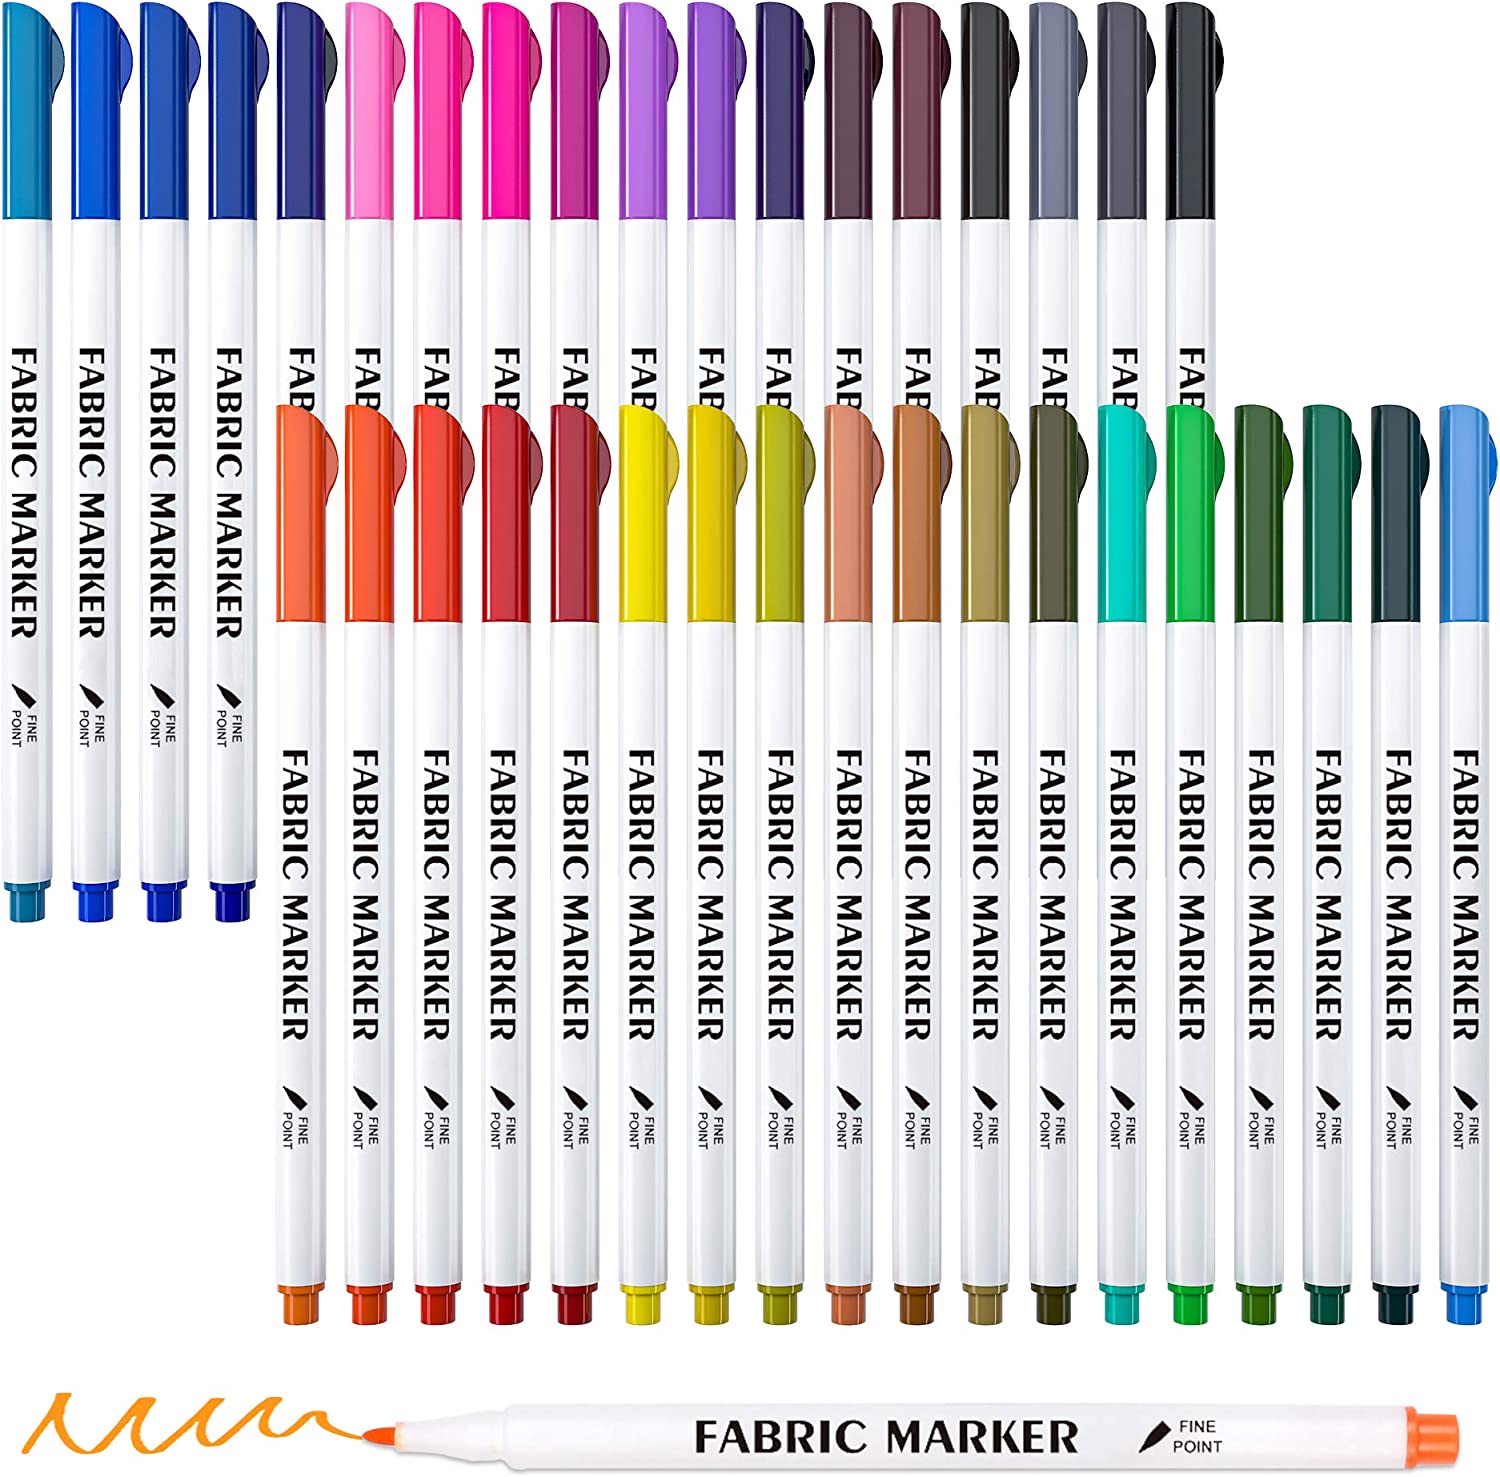 Fabric Markers, Lelix 36 Colors Permanent Fabric Pens for Writing Painting on T-Shirts Clothes Sneakers Canvas, Child Safe & Non-Toxic for Kids Adults